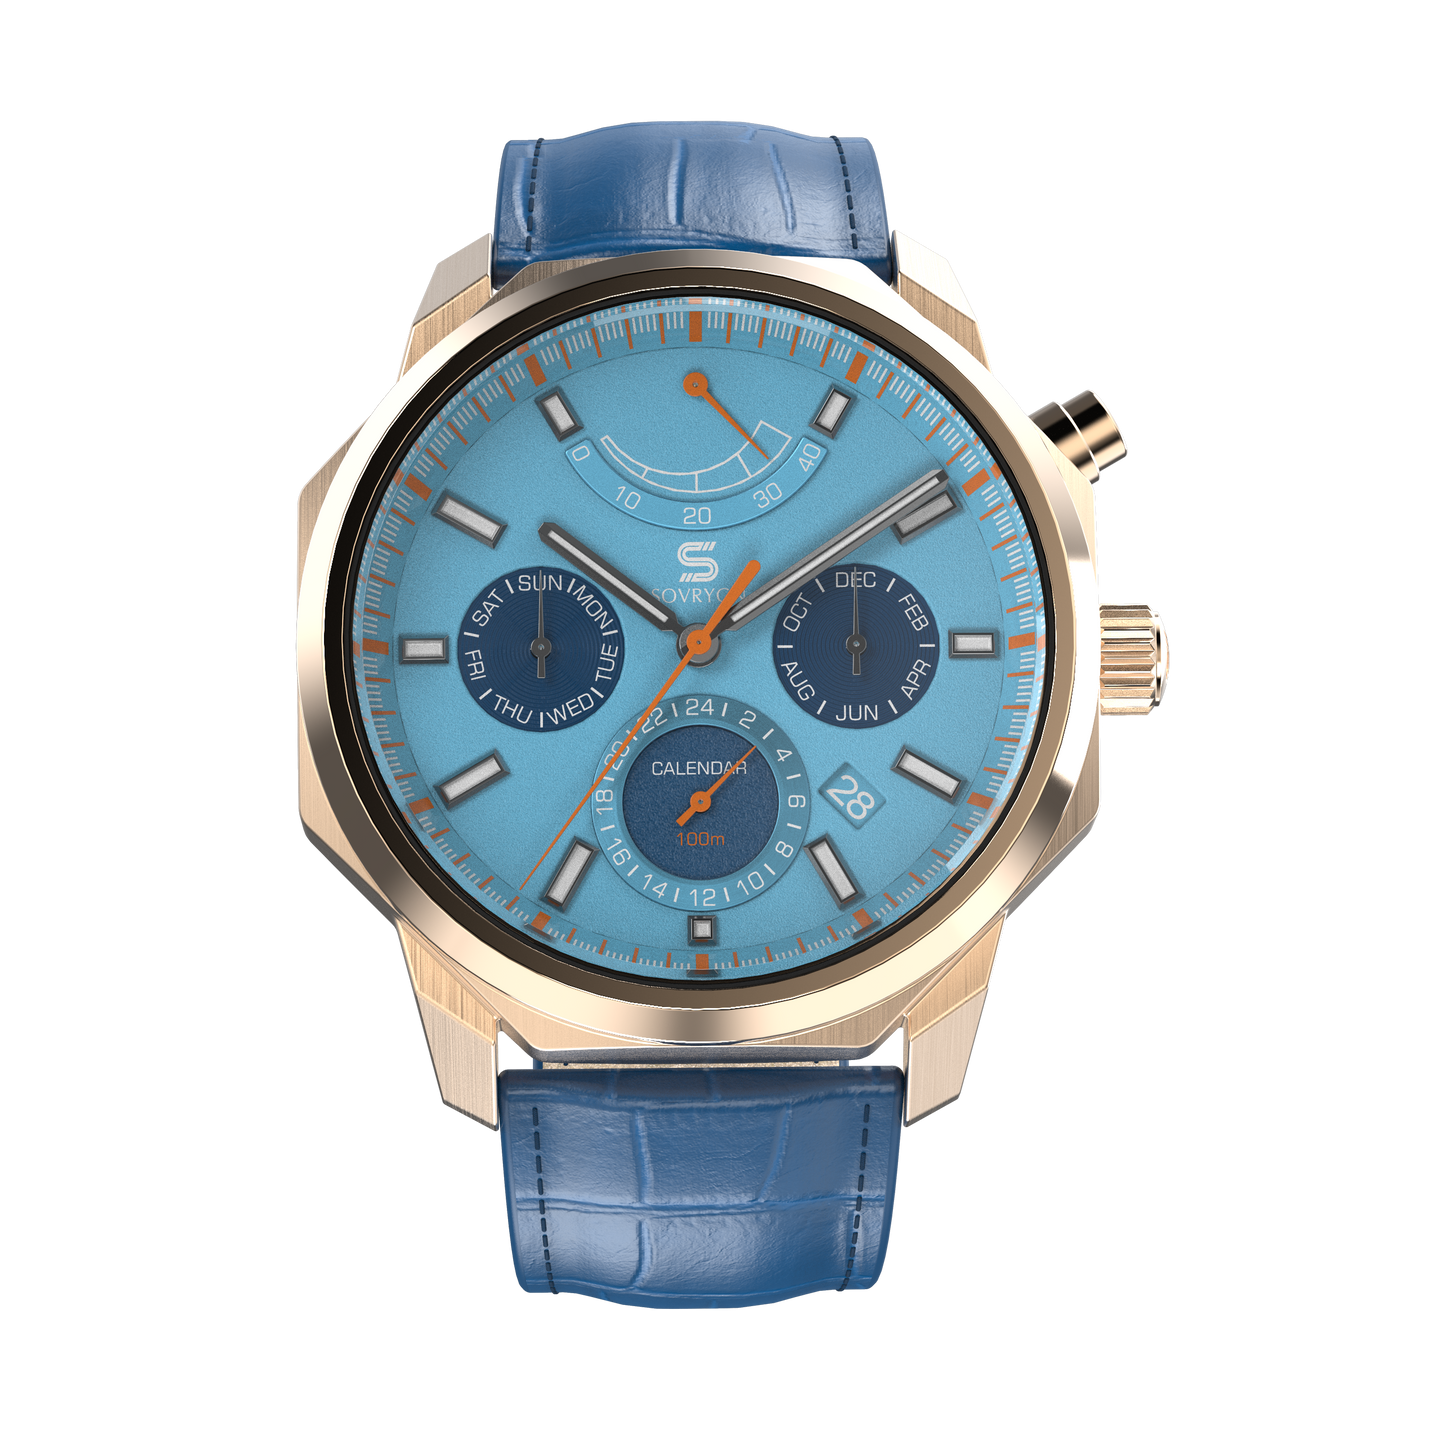 SOVRYGN Blue leather strap with rose gold deployment clasp